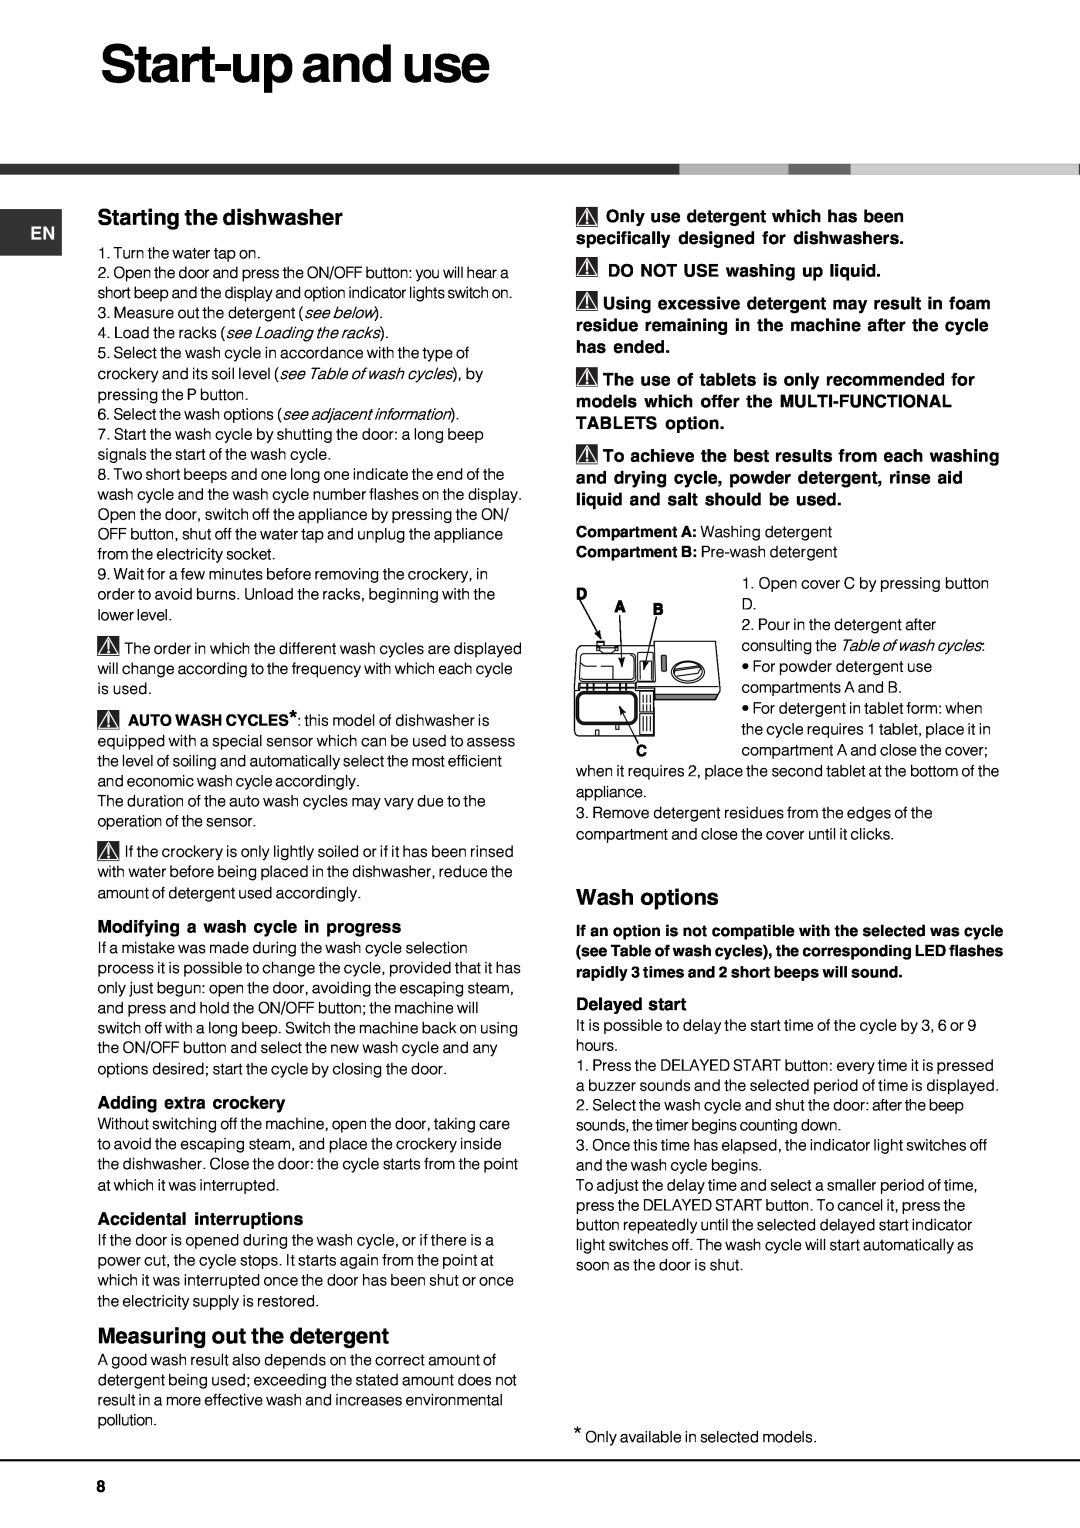 Hotpoint LFT 321 manual Start-upand use, Starting the dishwasher, Measuring out the detergent, Wash options 